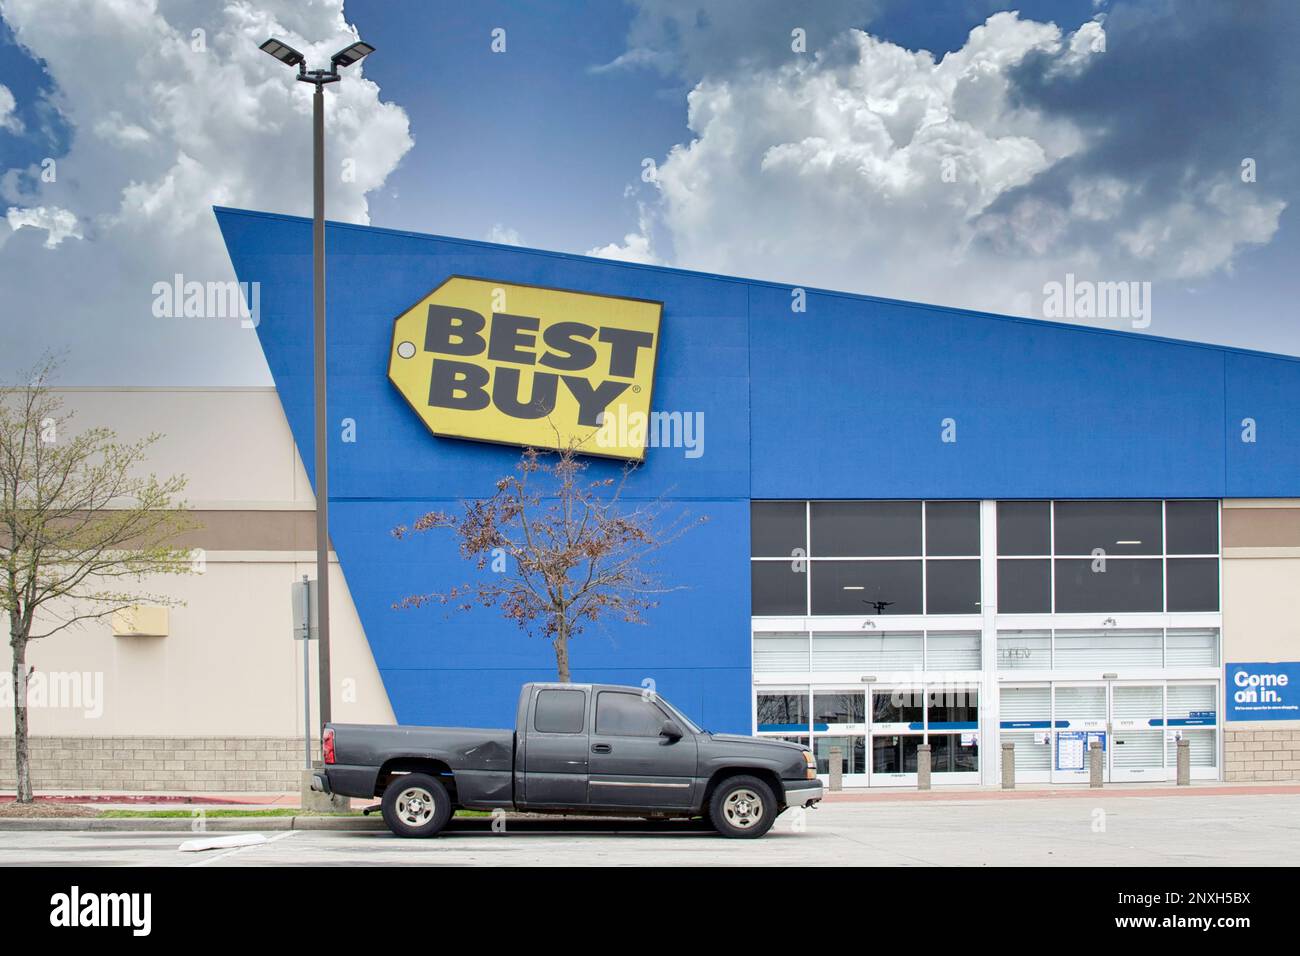 Houston, Texas USA 02-25-2023: Best Buy business exterior storefront with a single vehicle in parking lot in Houston, TX. Major electronics retailer. Stock Photo